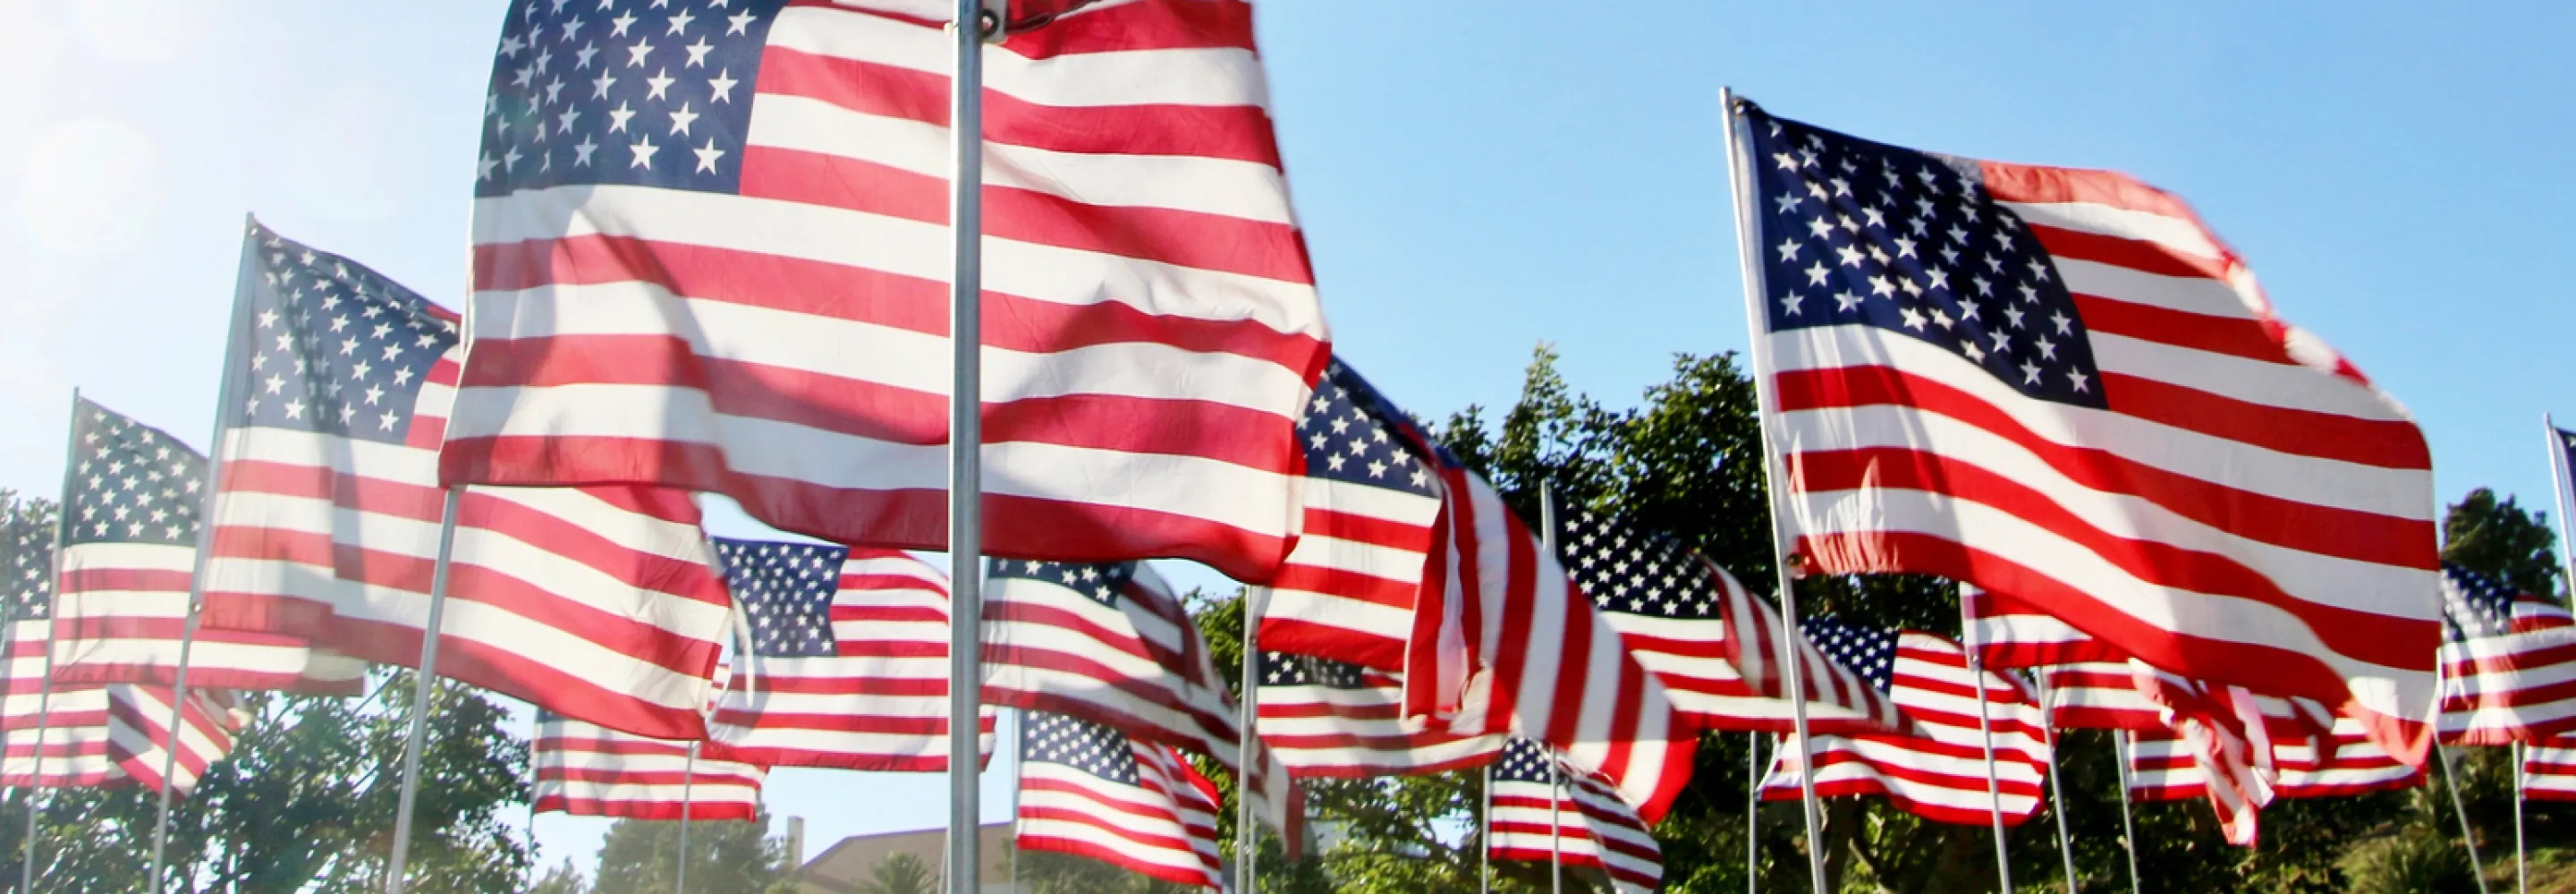 American flags blowing in the wind